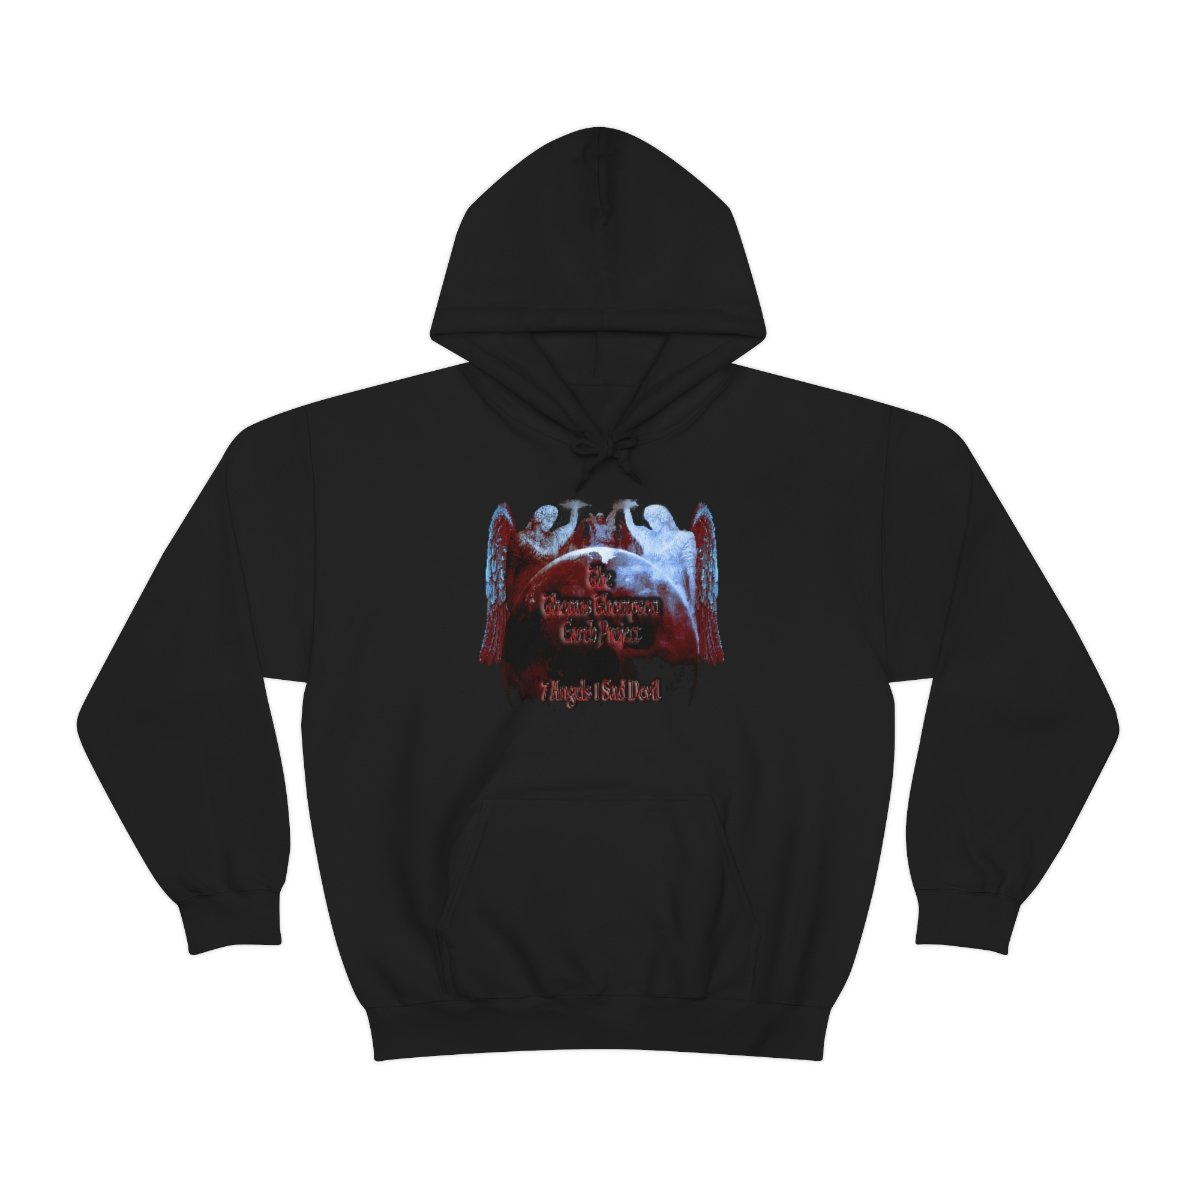 The Thomas Thompson Earth Project 7 Angels Pullover Hooded Sweatshirt (18500)